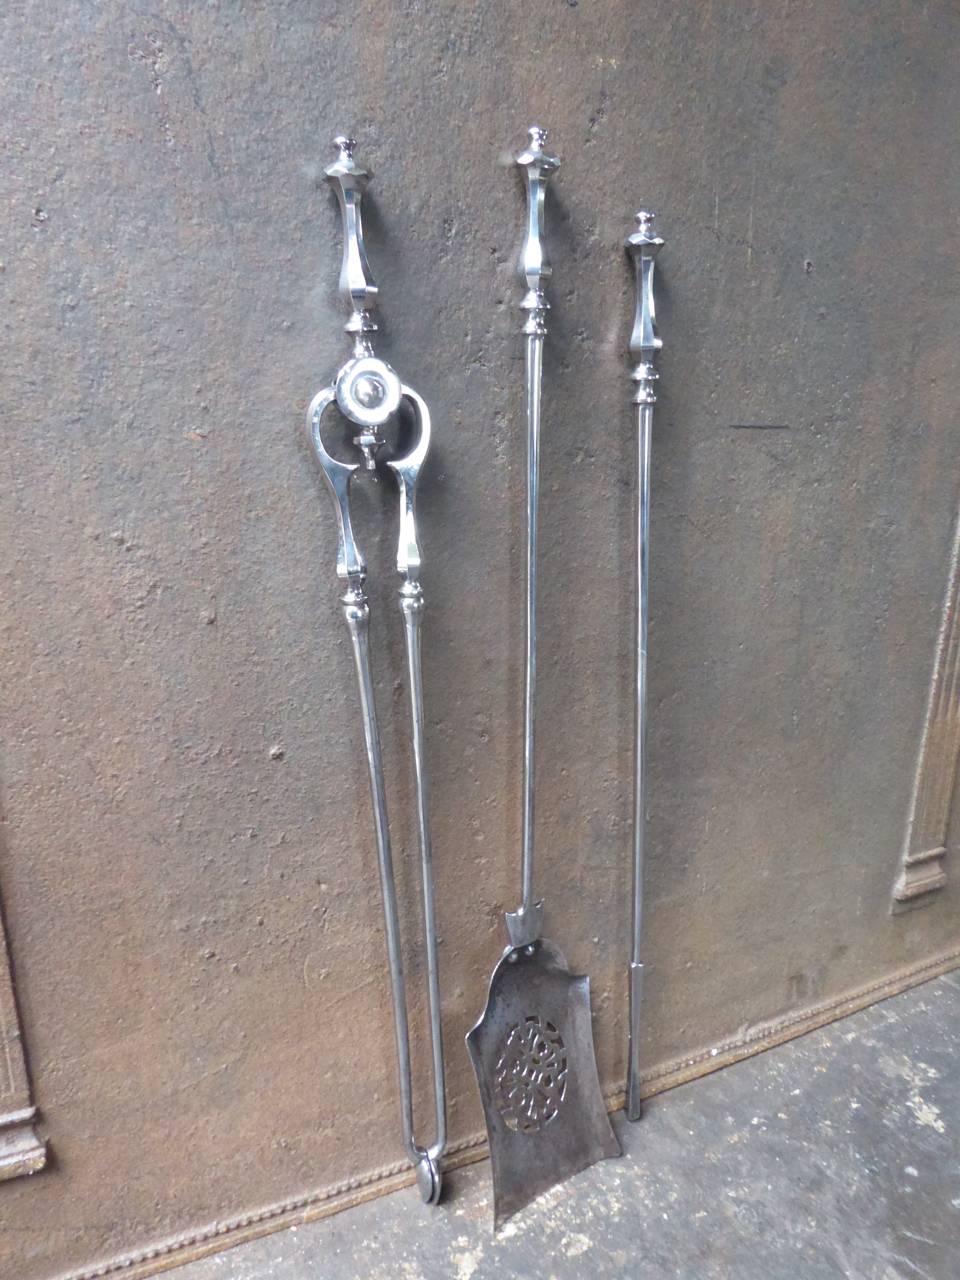 19th century English fireplace tool set, fire irons made of polished steel.